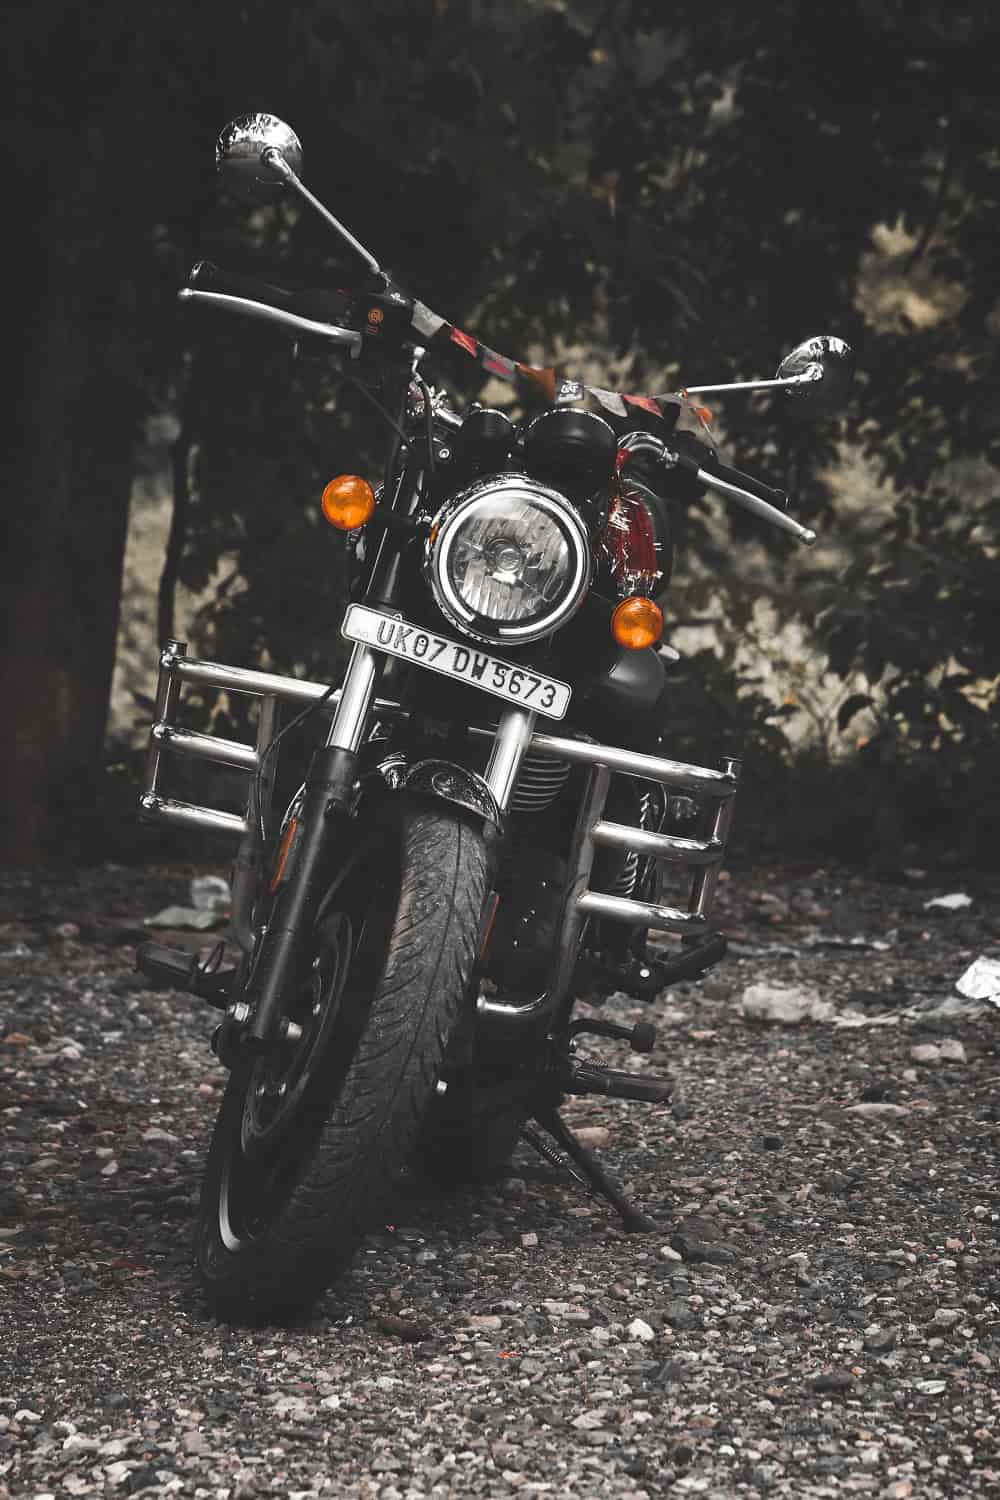 Royal Enfield Meteor 350 - Is It The Best Affordable Cruiser? - AutoRiddle